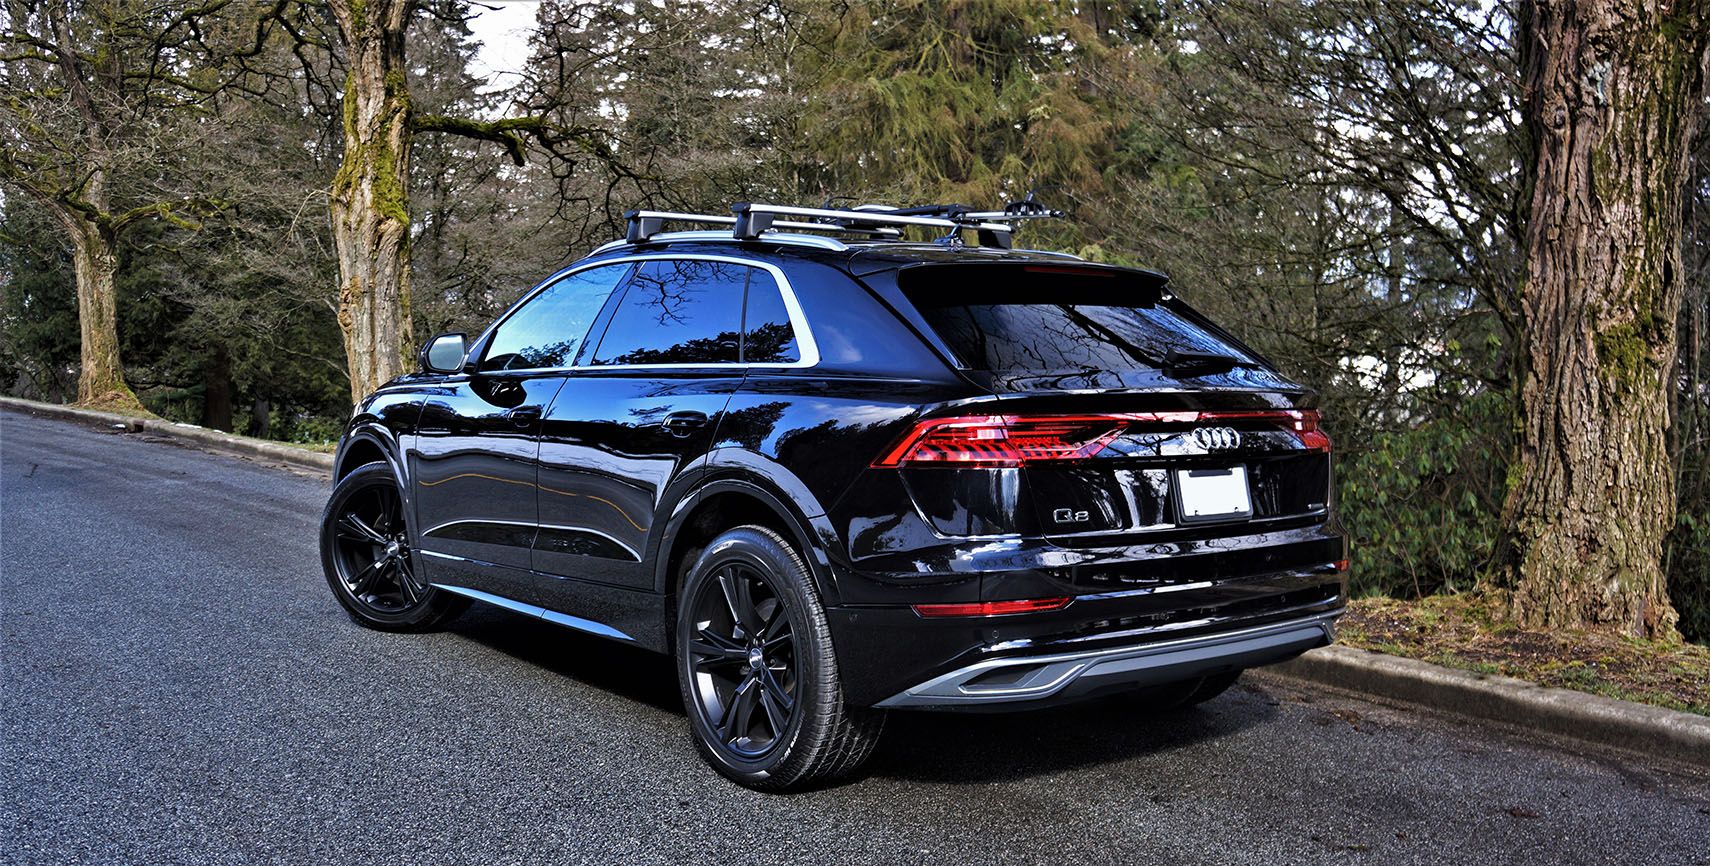 Audi's Q8 looks fabulous from all angles.